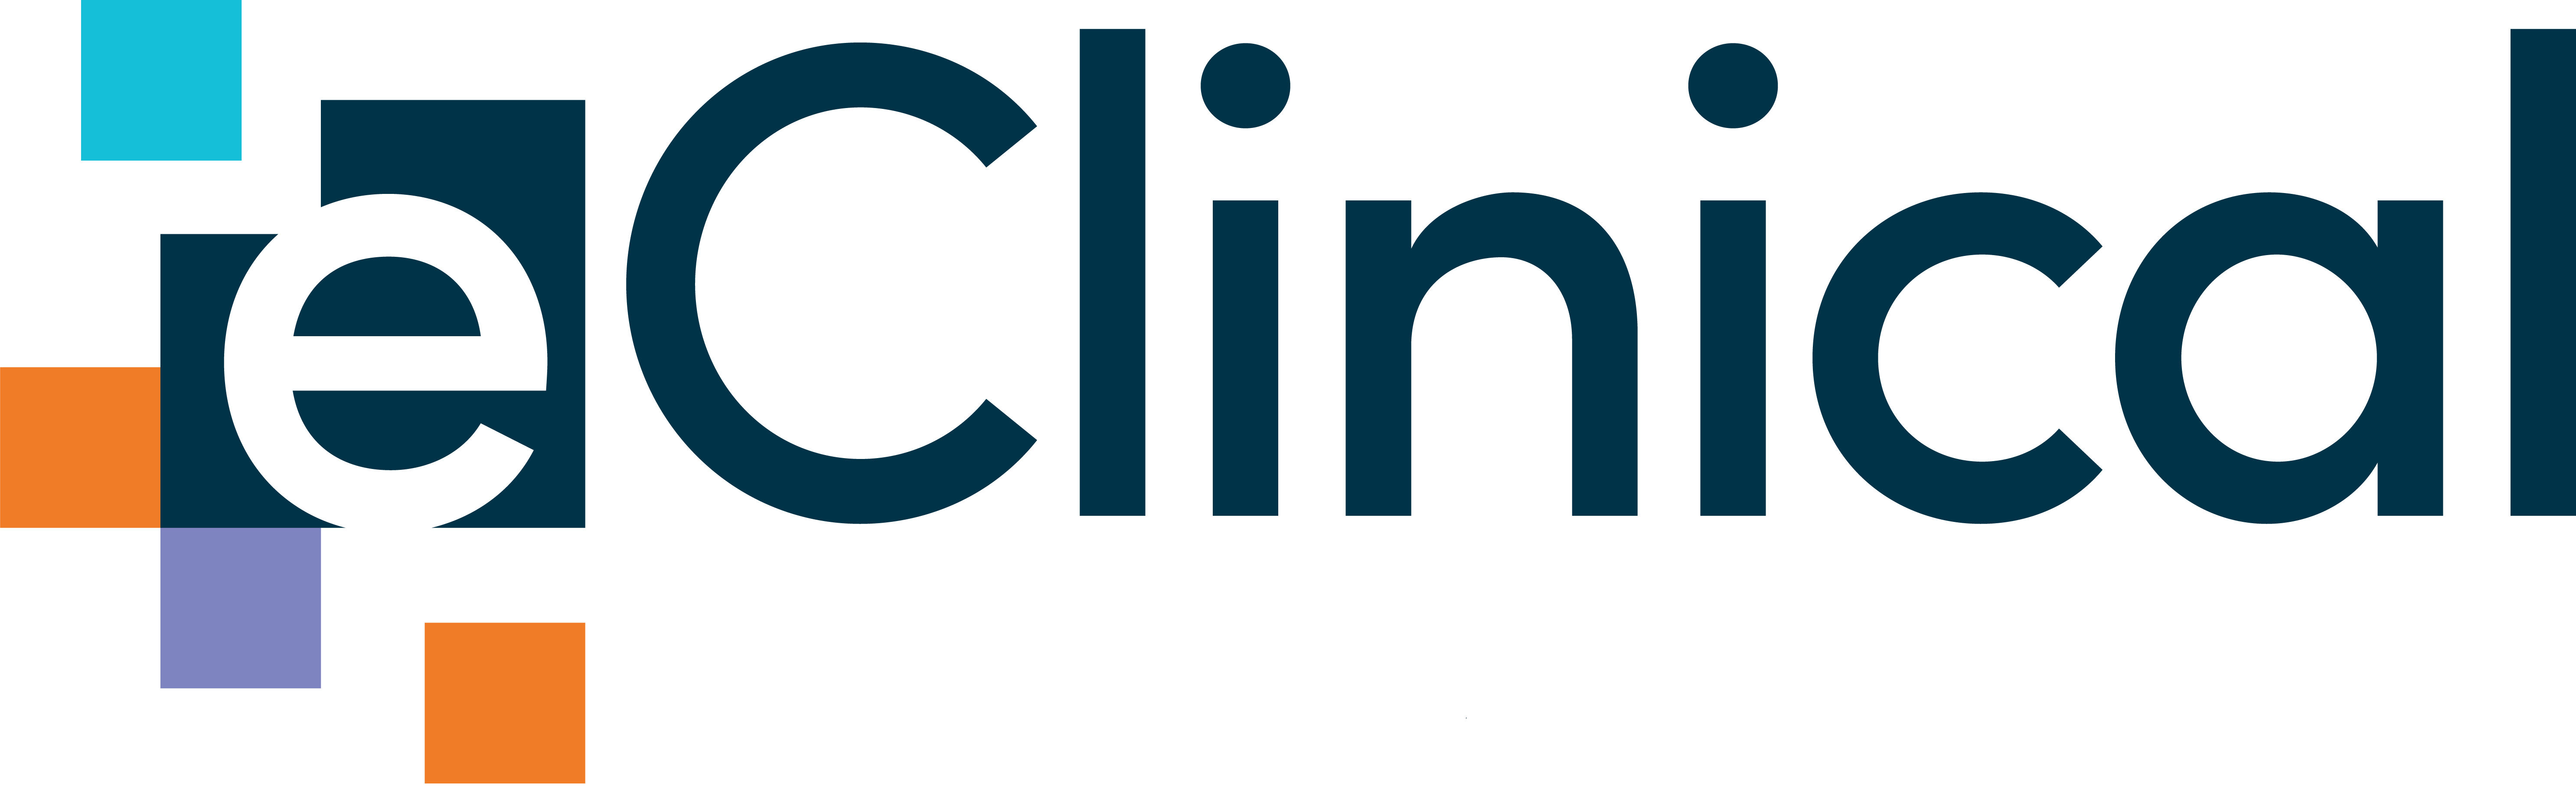 eClinical Solutions